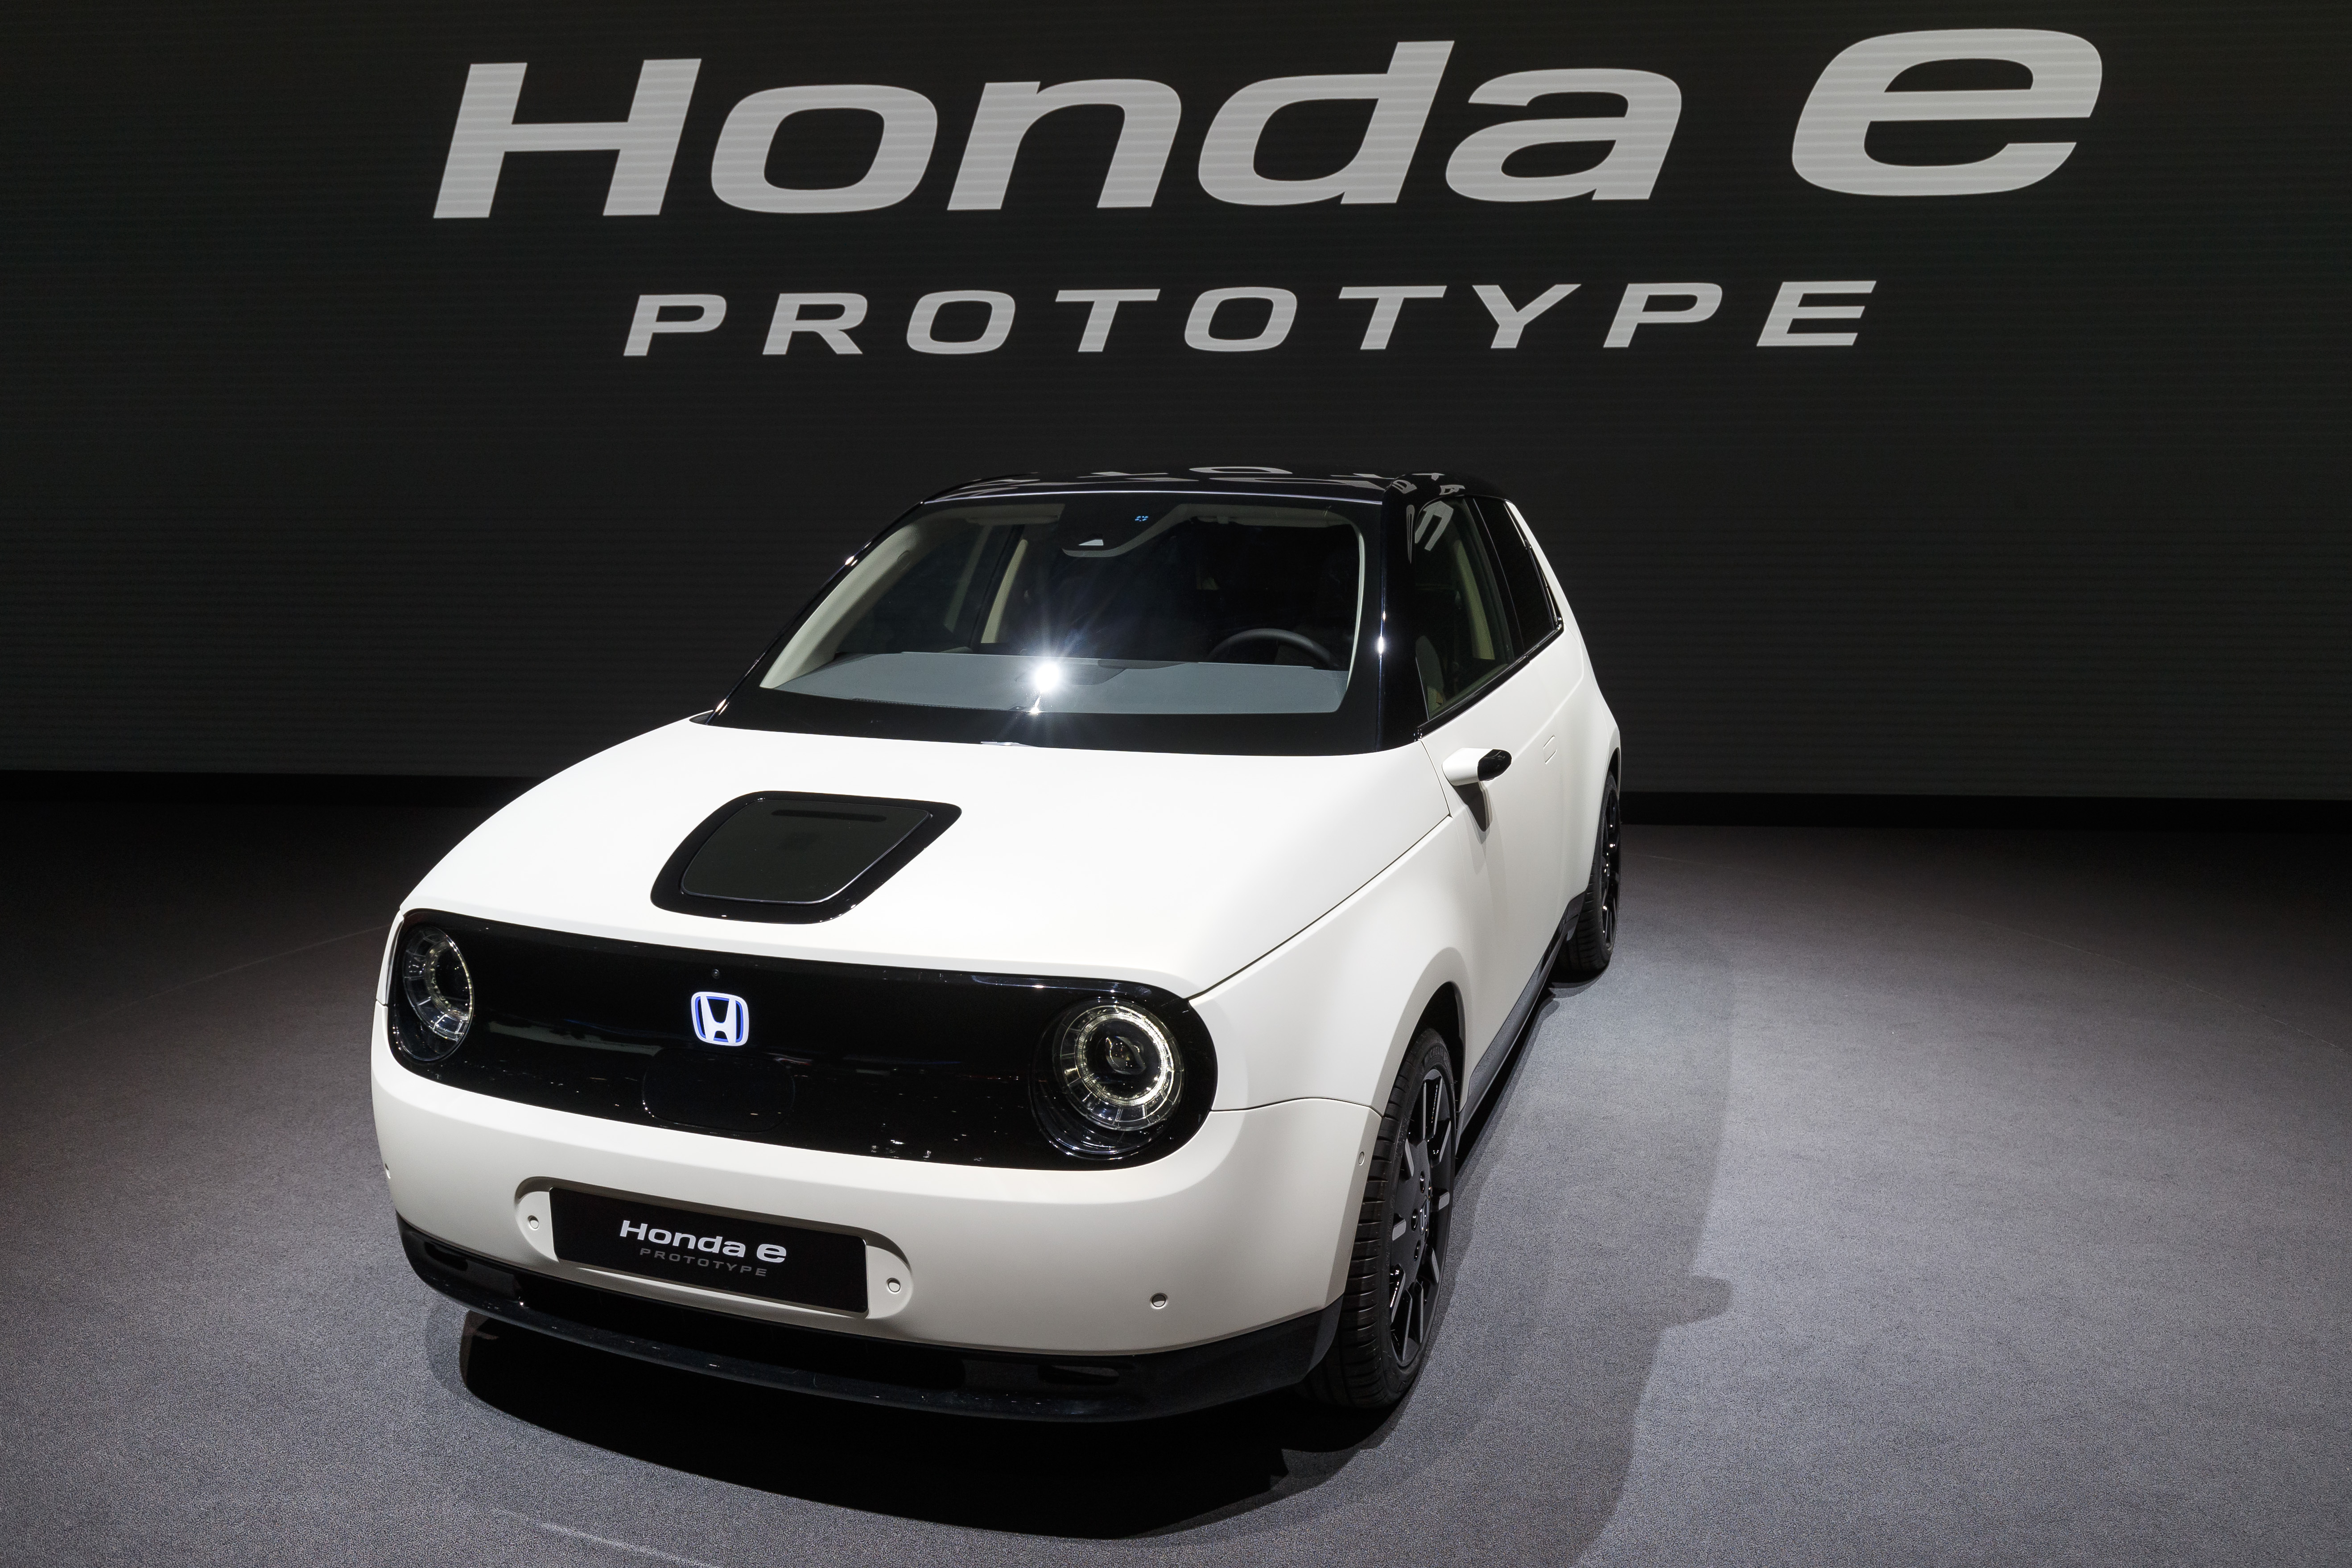 The new Honda E Concept is presented during the press day at the 89th Geneva International Motor Show in Geneva, Switzerland, Wednesday, March 6, 2019. The Motor Show will open its gates to the public from 7 to 17 March presenting more than 180 exhibitors and more than 100 world and European premieres. (Cyril Zingaro/Keystone via AP)